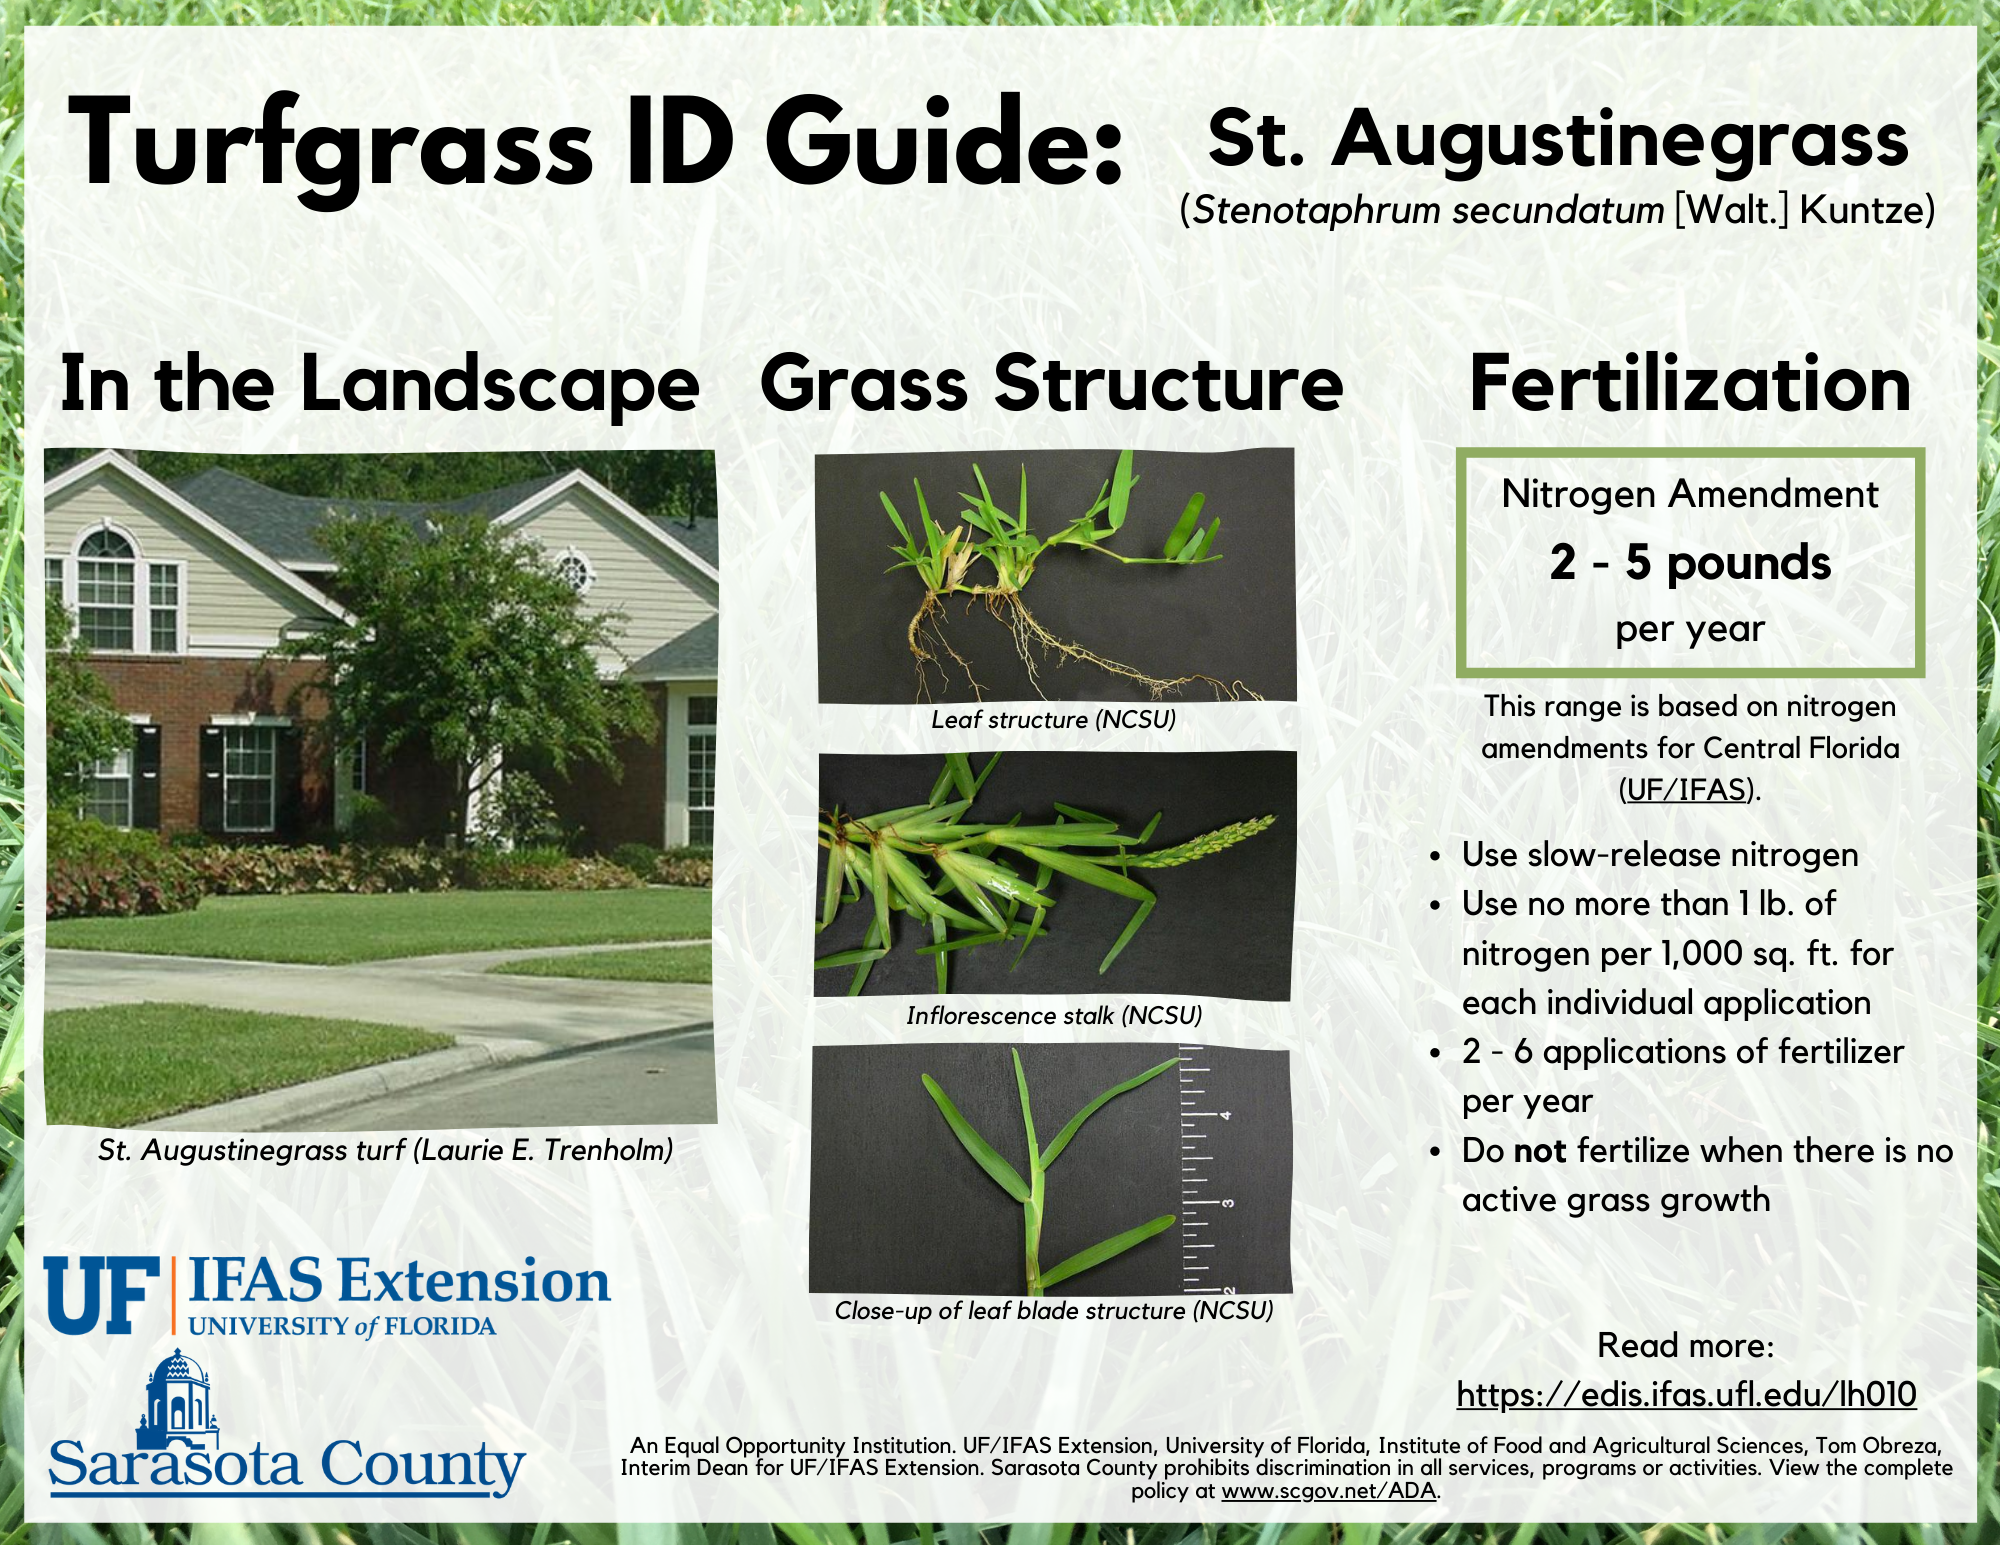 Guide to fertilizing St. Augustinegrass in Sarasota County